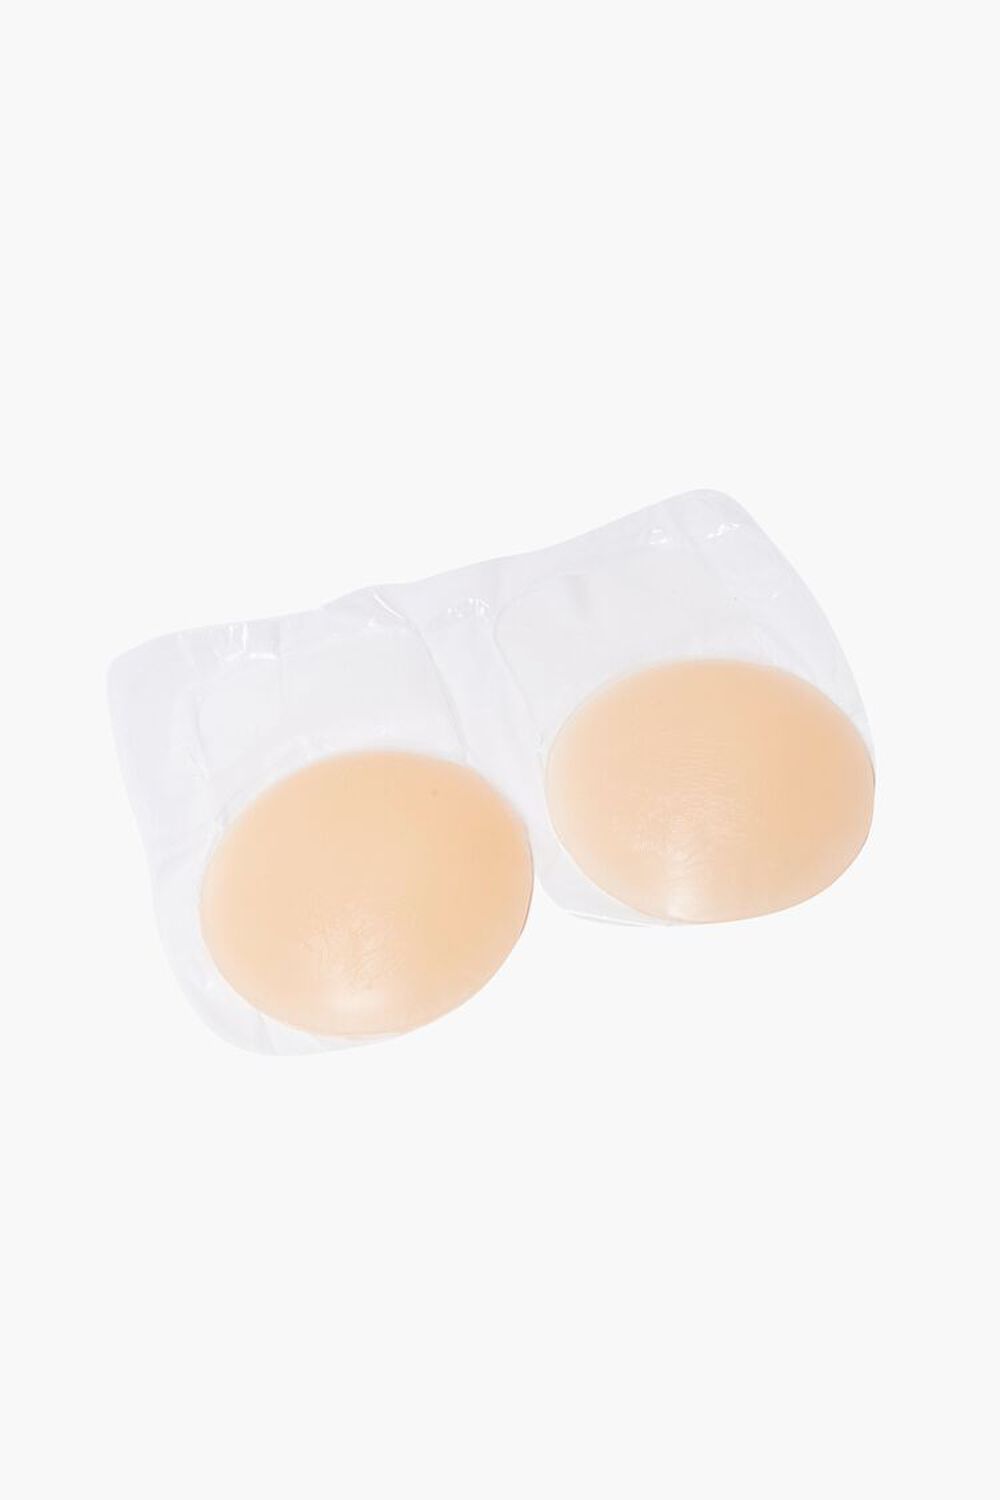 NUDE Reusable Silicone Pasties, image 2